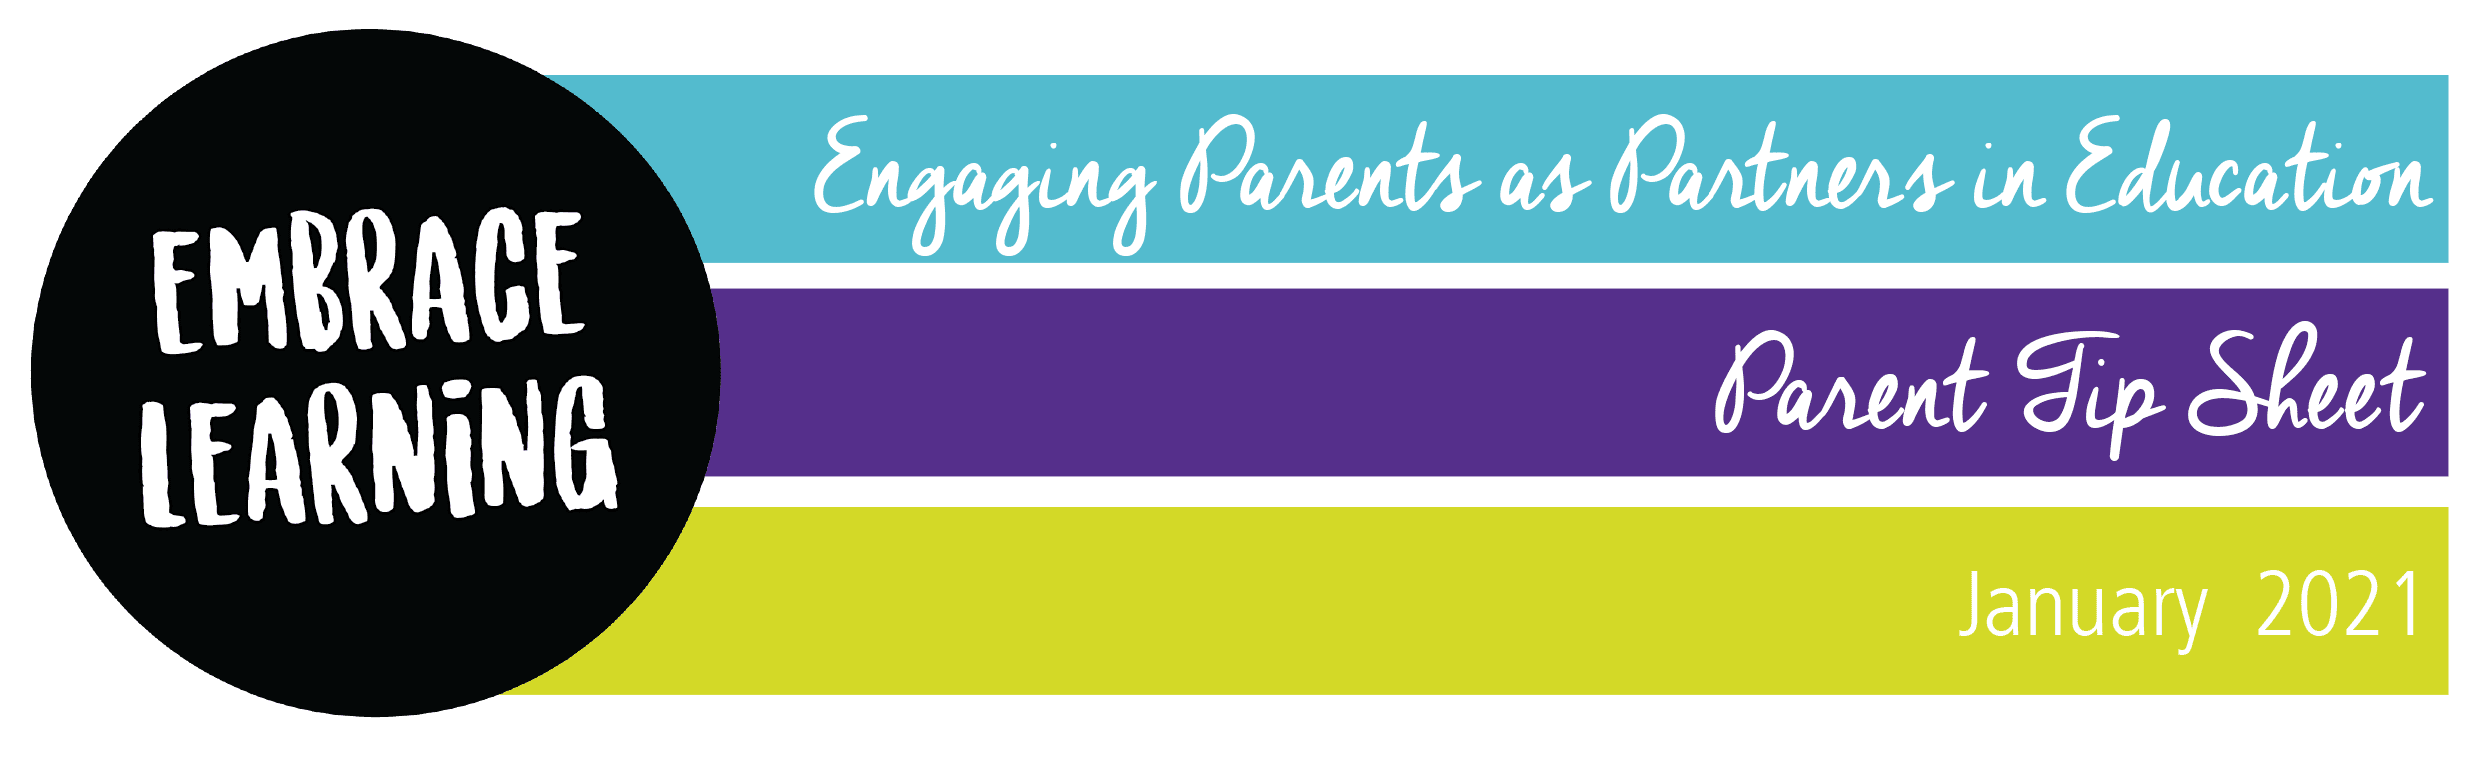 Parent Engagement Tips banner for January 2021